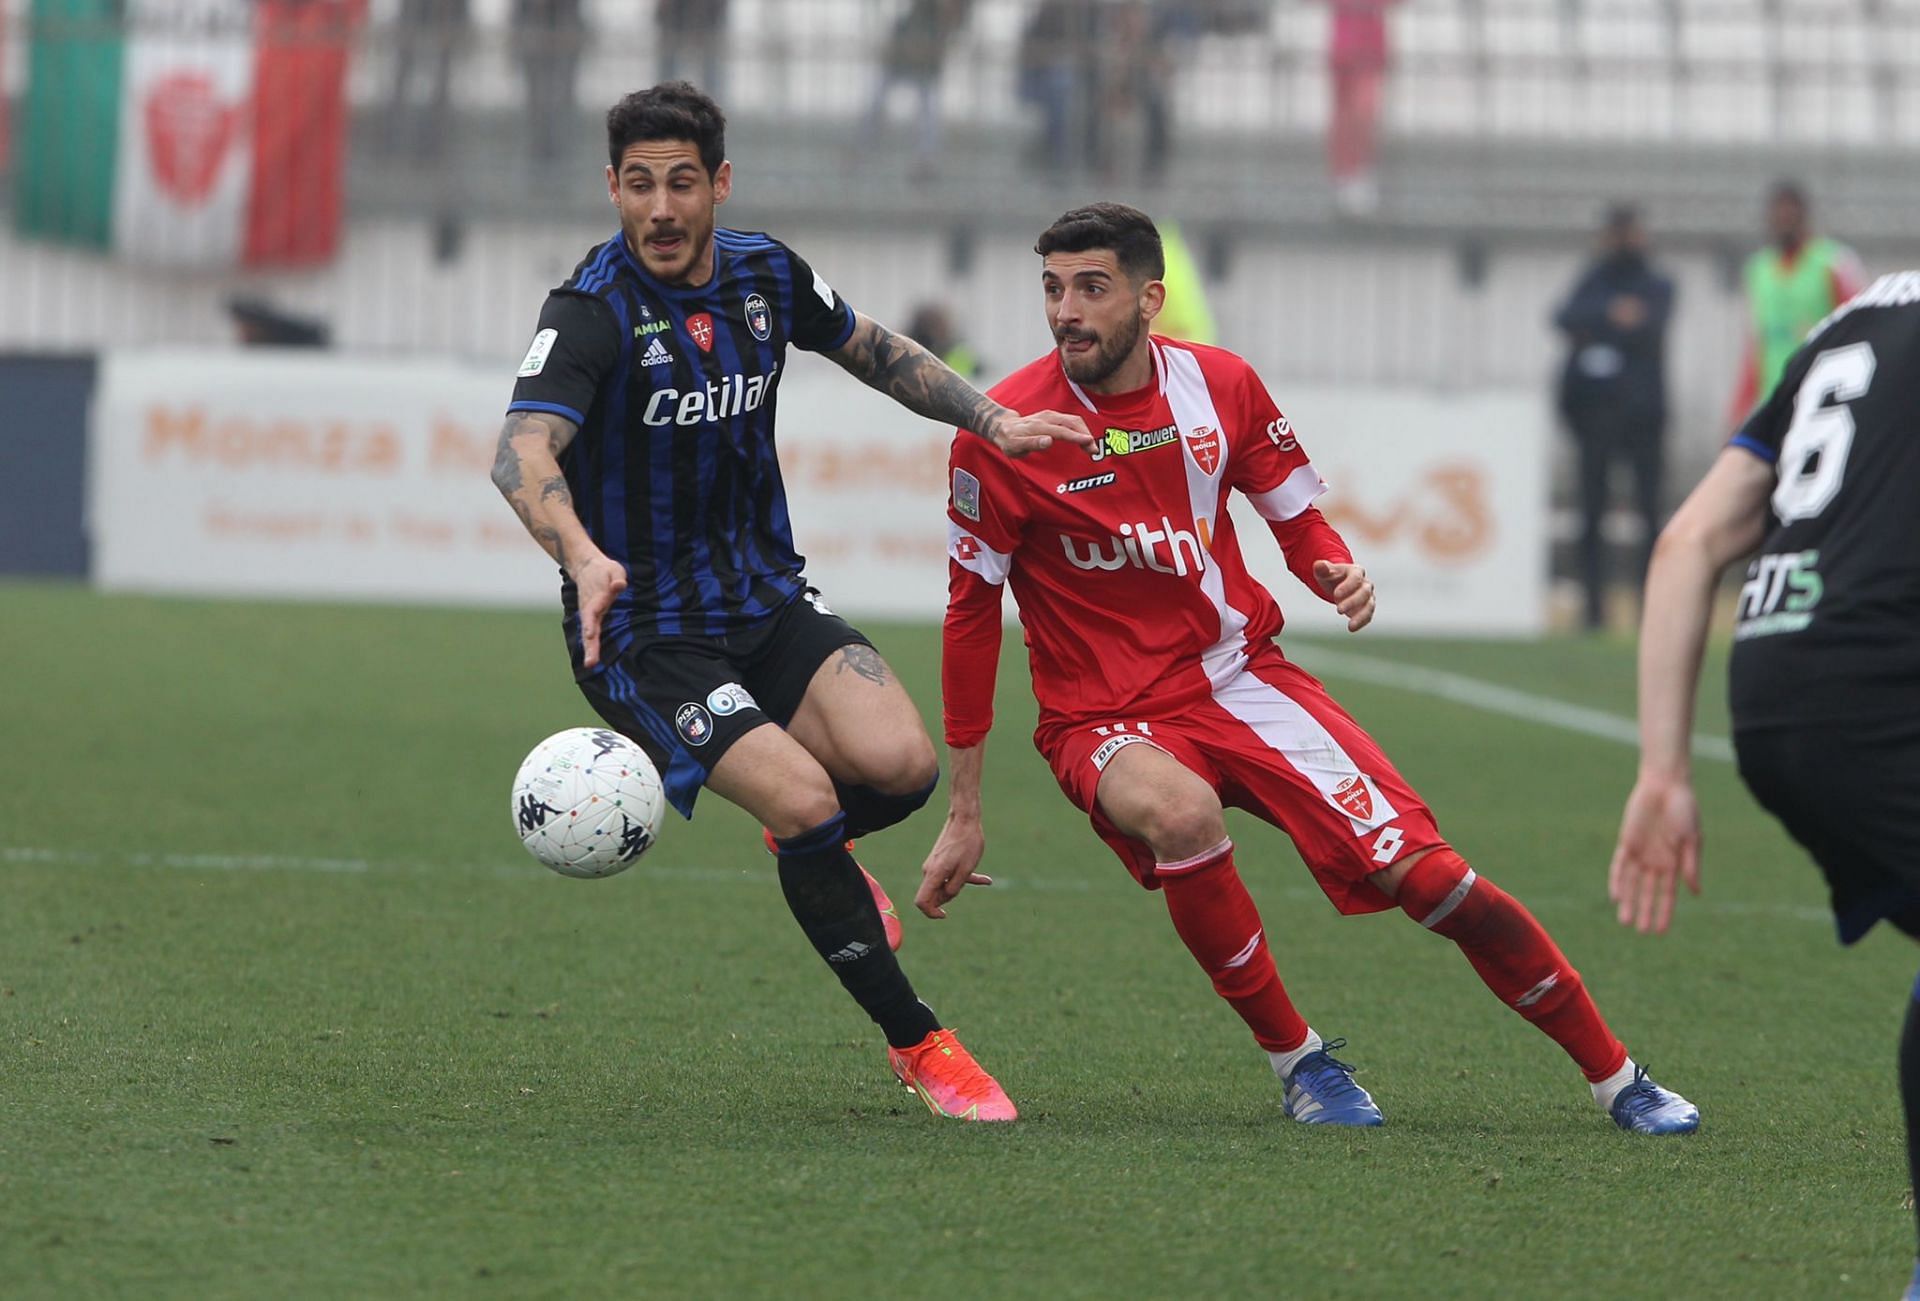 Monza face Pisa in the Serie B promotion playoffs final on Thursday